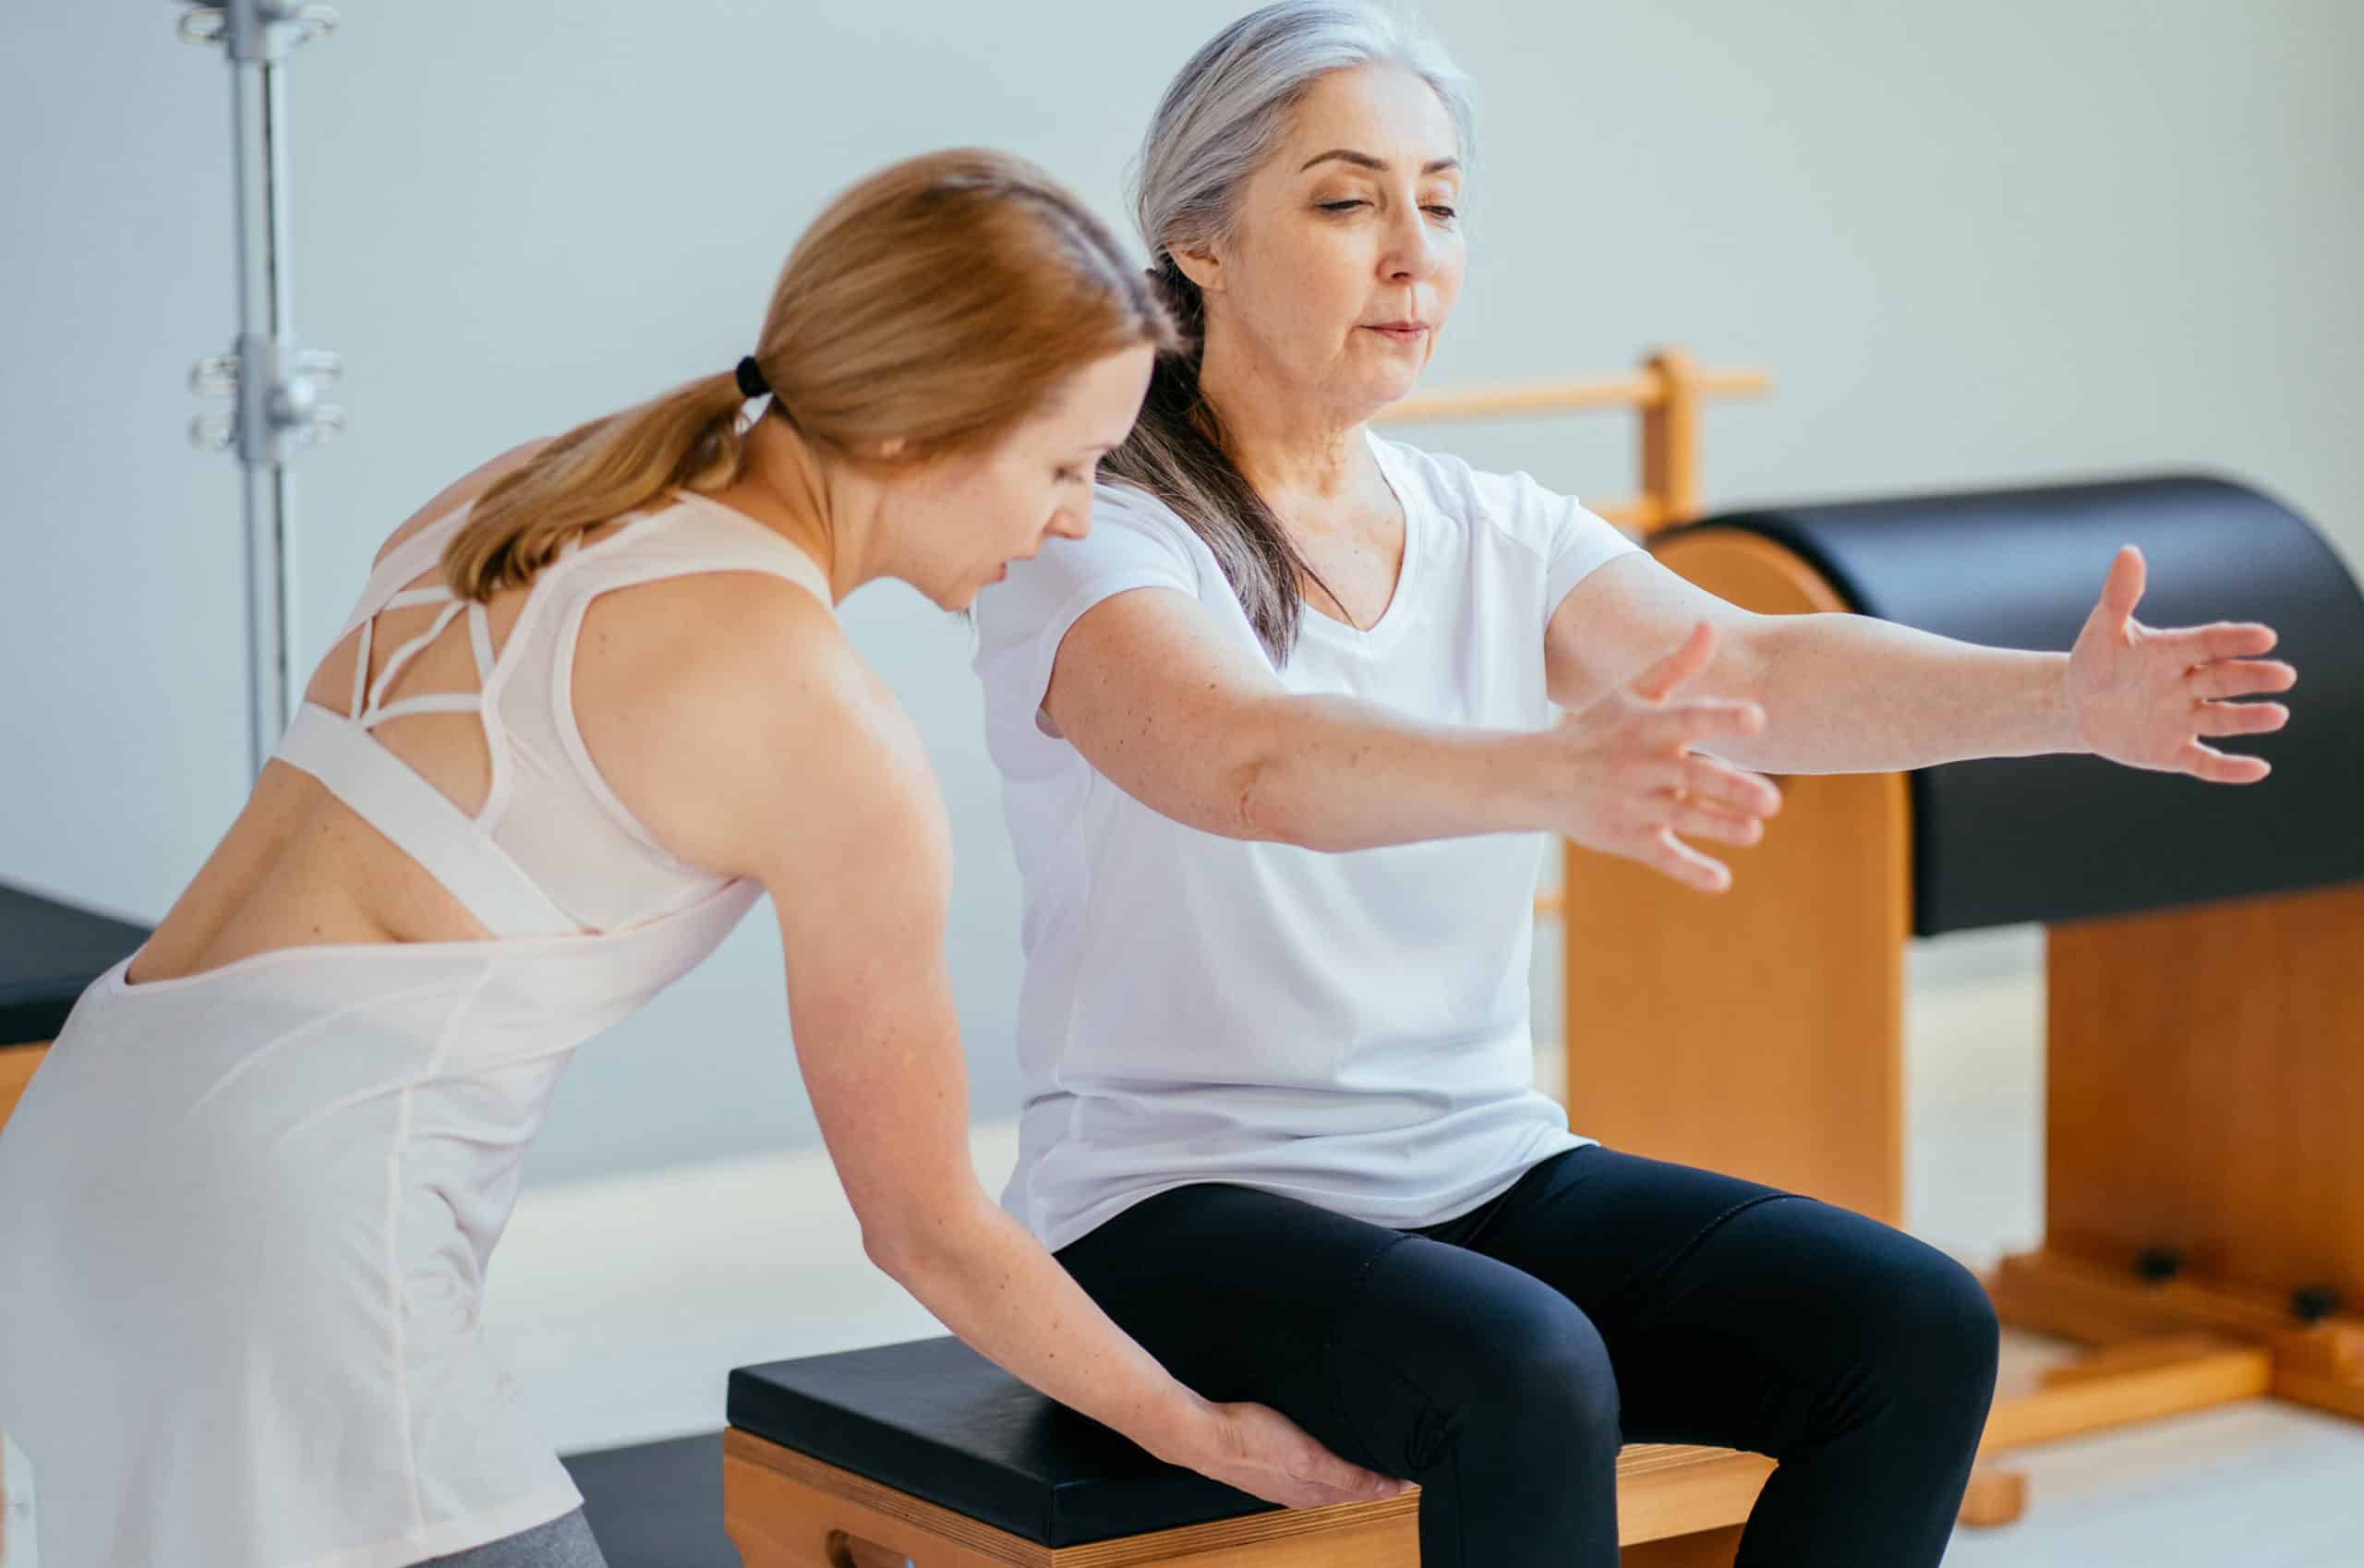 Chair Yoga for Seniors, Yoga for Healthy Aging